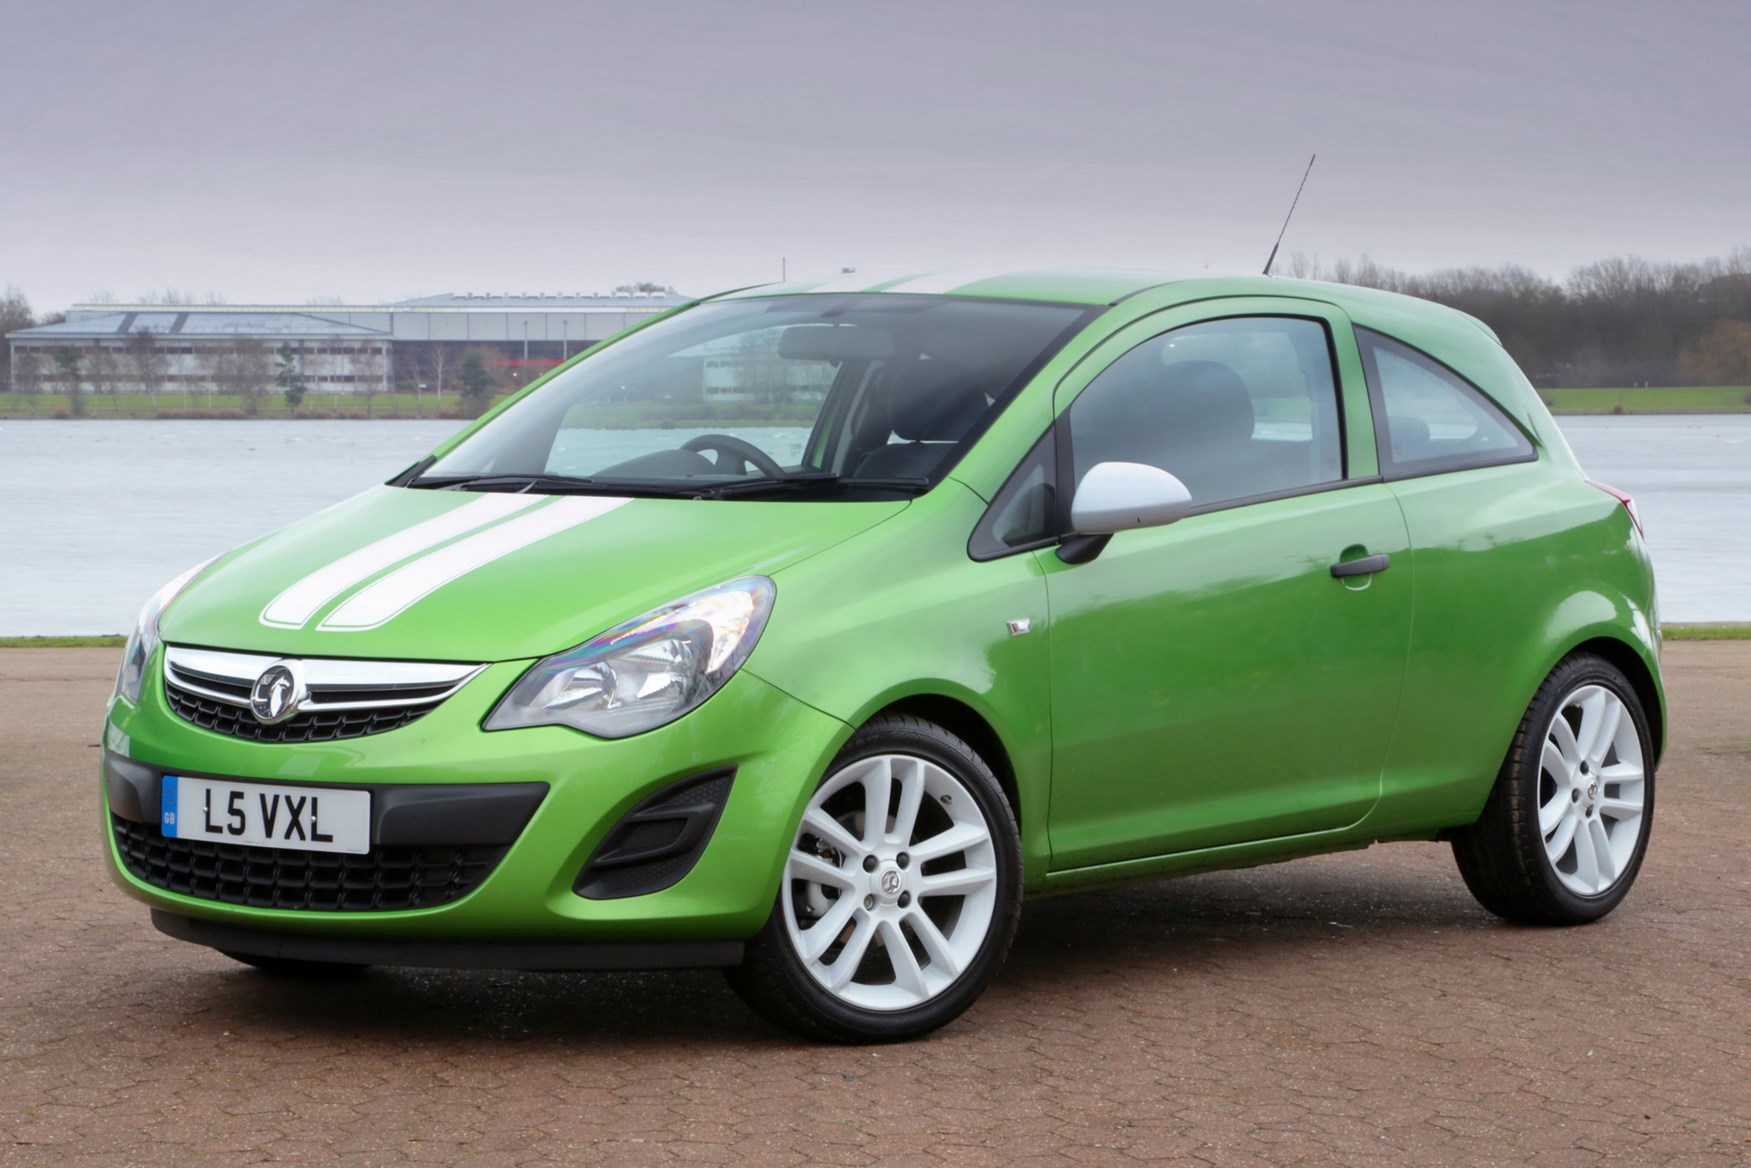 Vauxhall Corsa (2006 - 2010) used car review, Car review